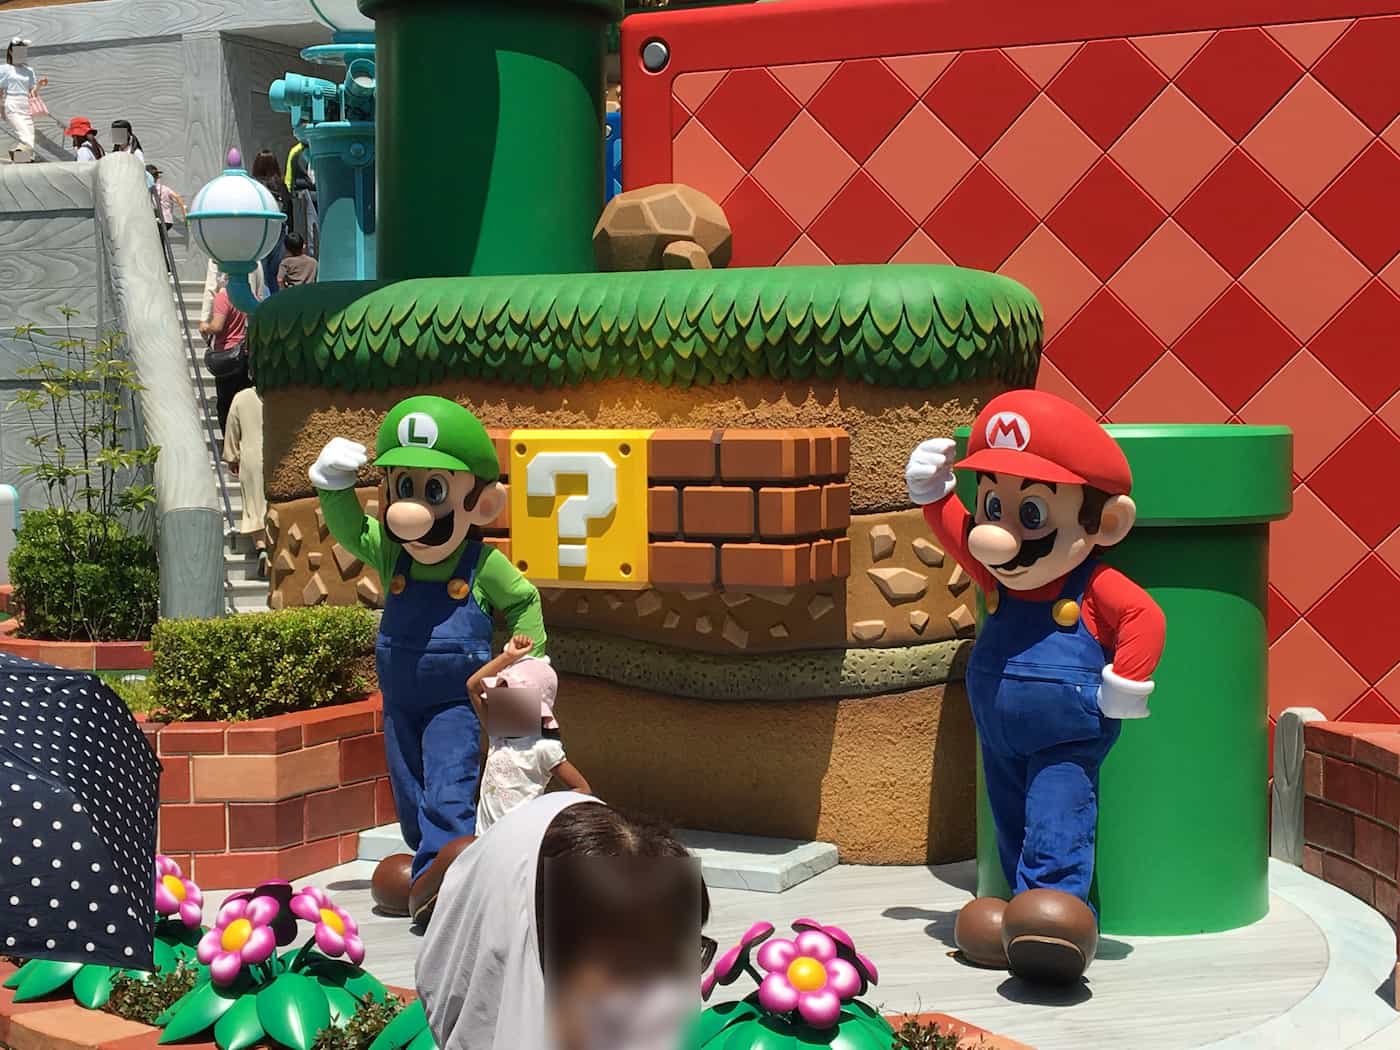 Mario & Luigi joyfully posing for pictures with delighted visitors at Super Nintendo World.